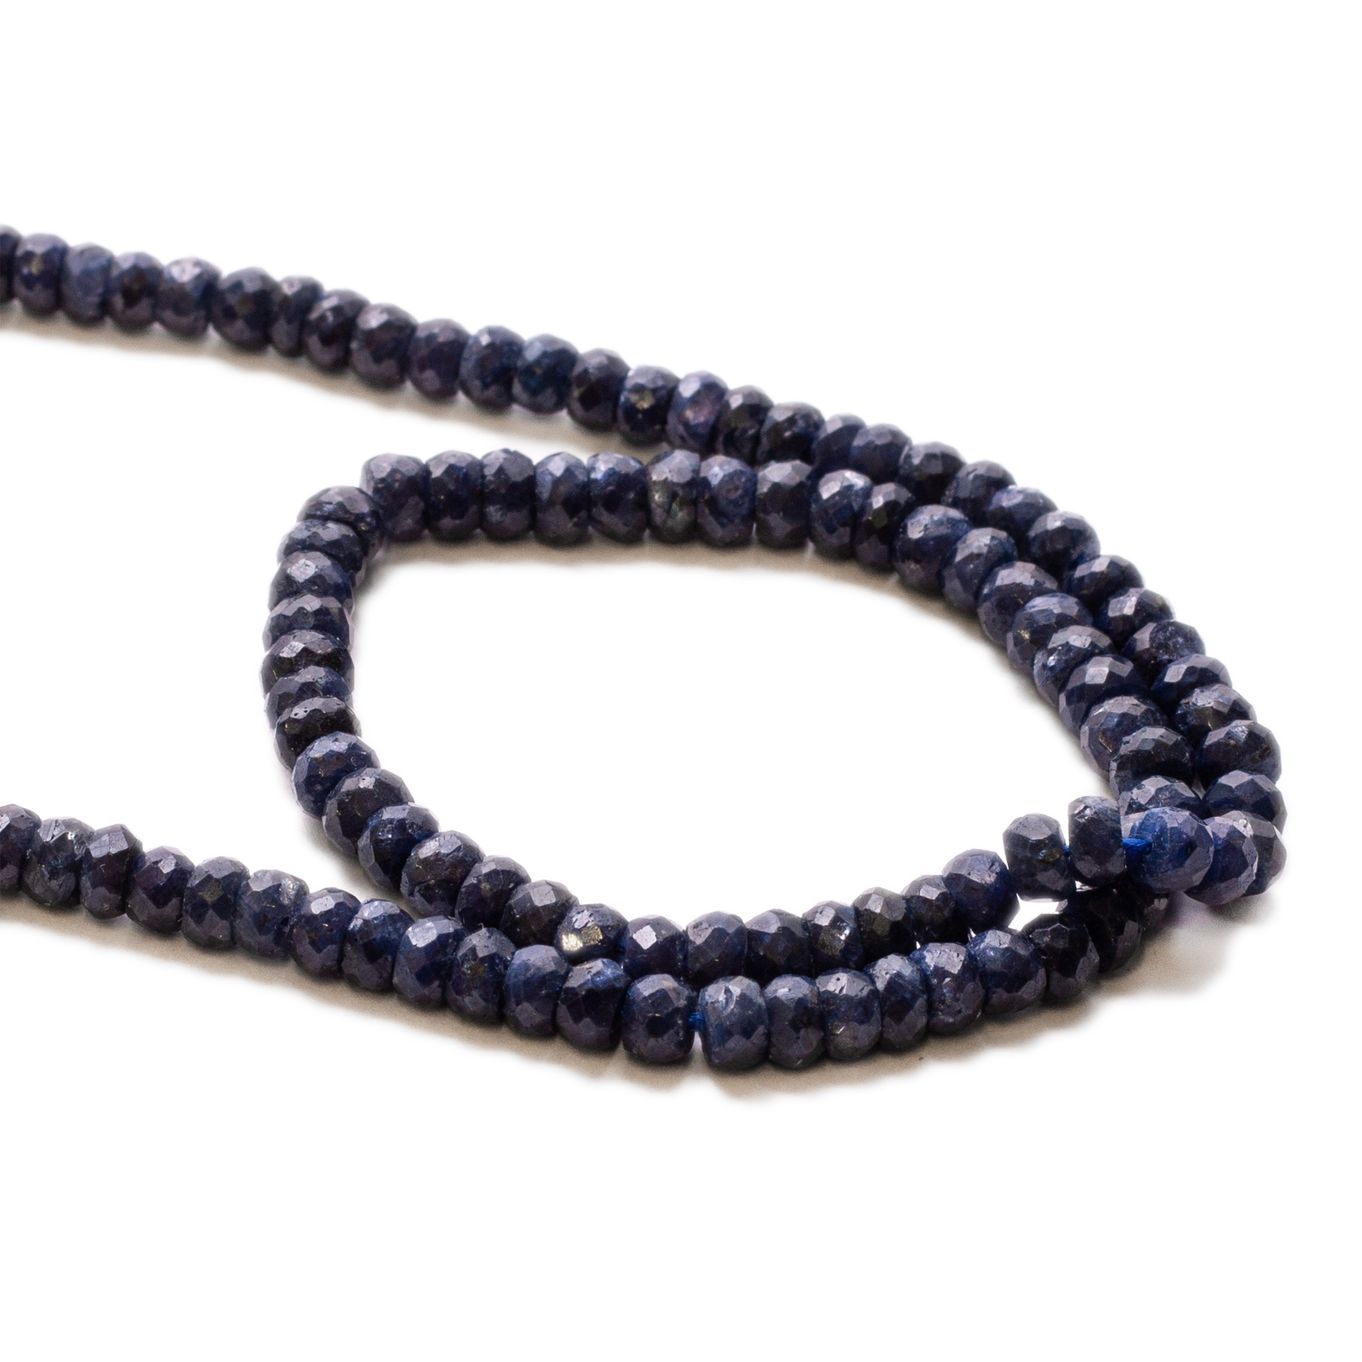 Corundum 'Sapphire' Faceted Rondelle Beads - Approx From 3.5mm